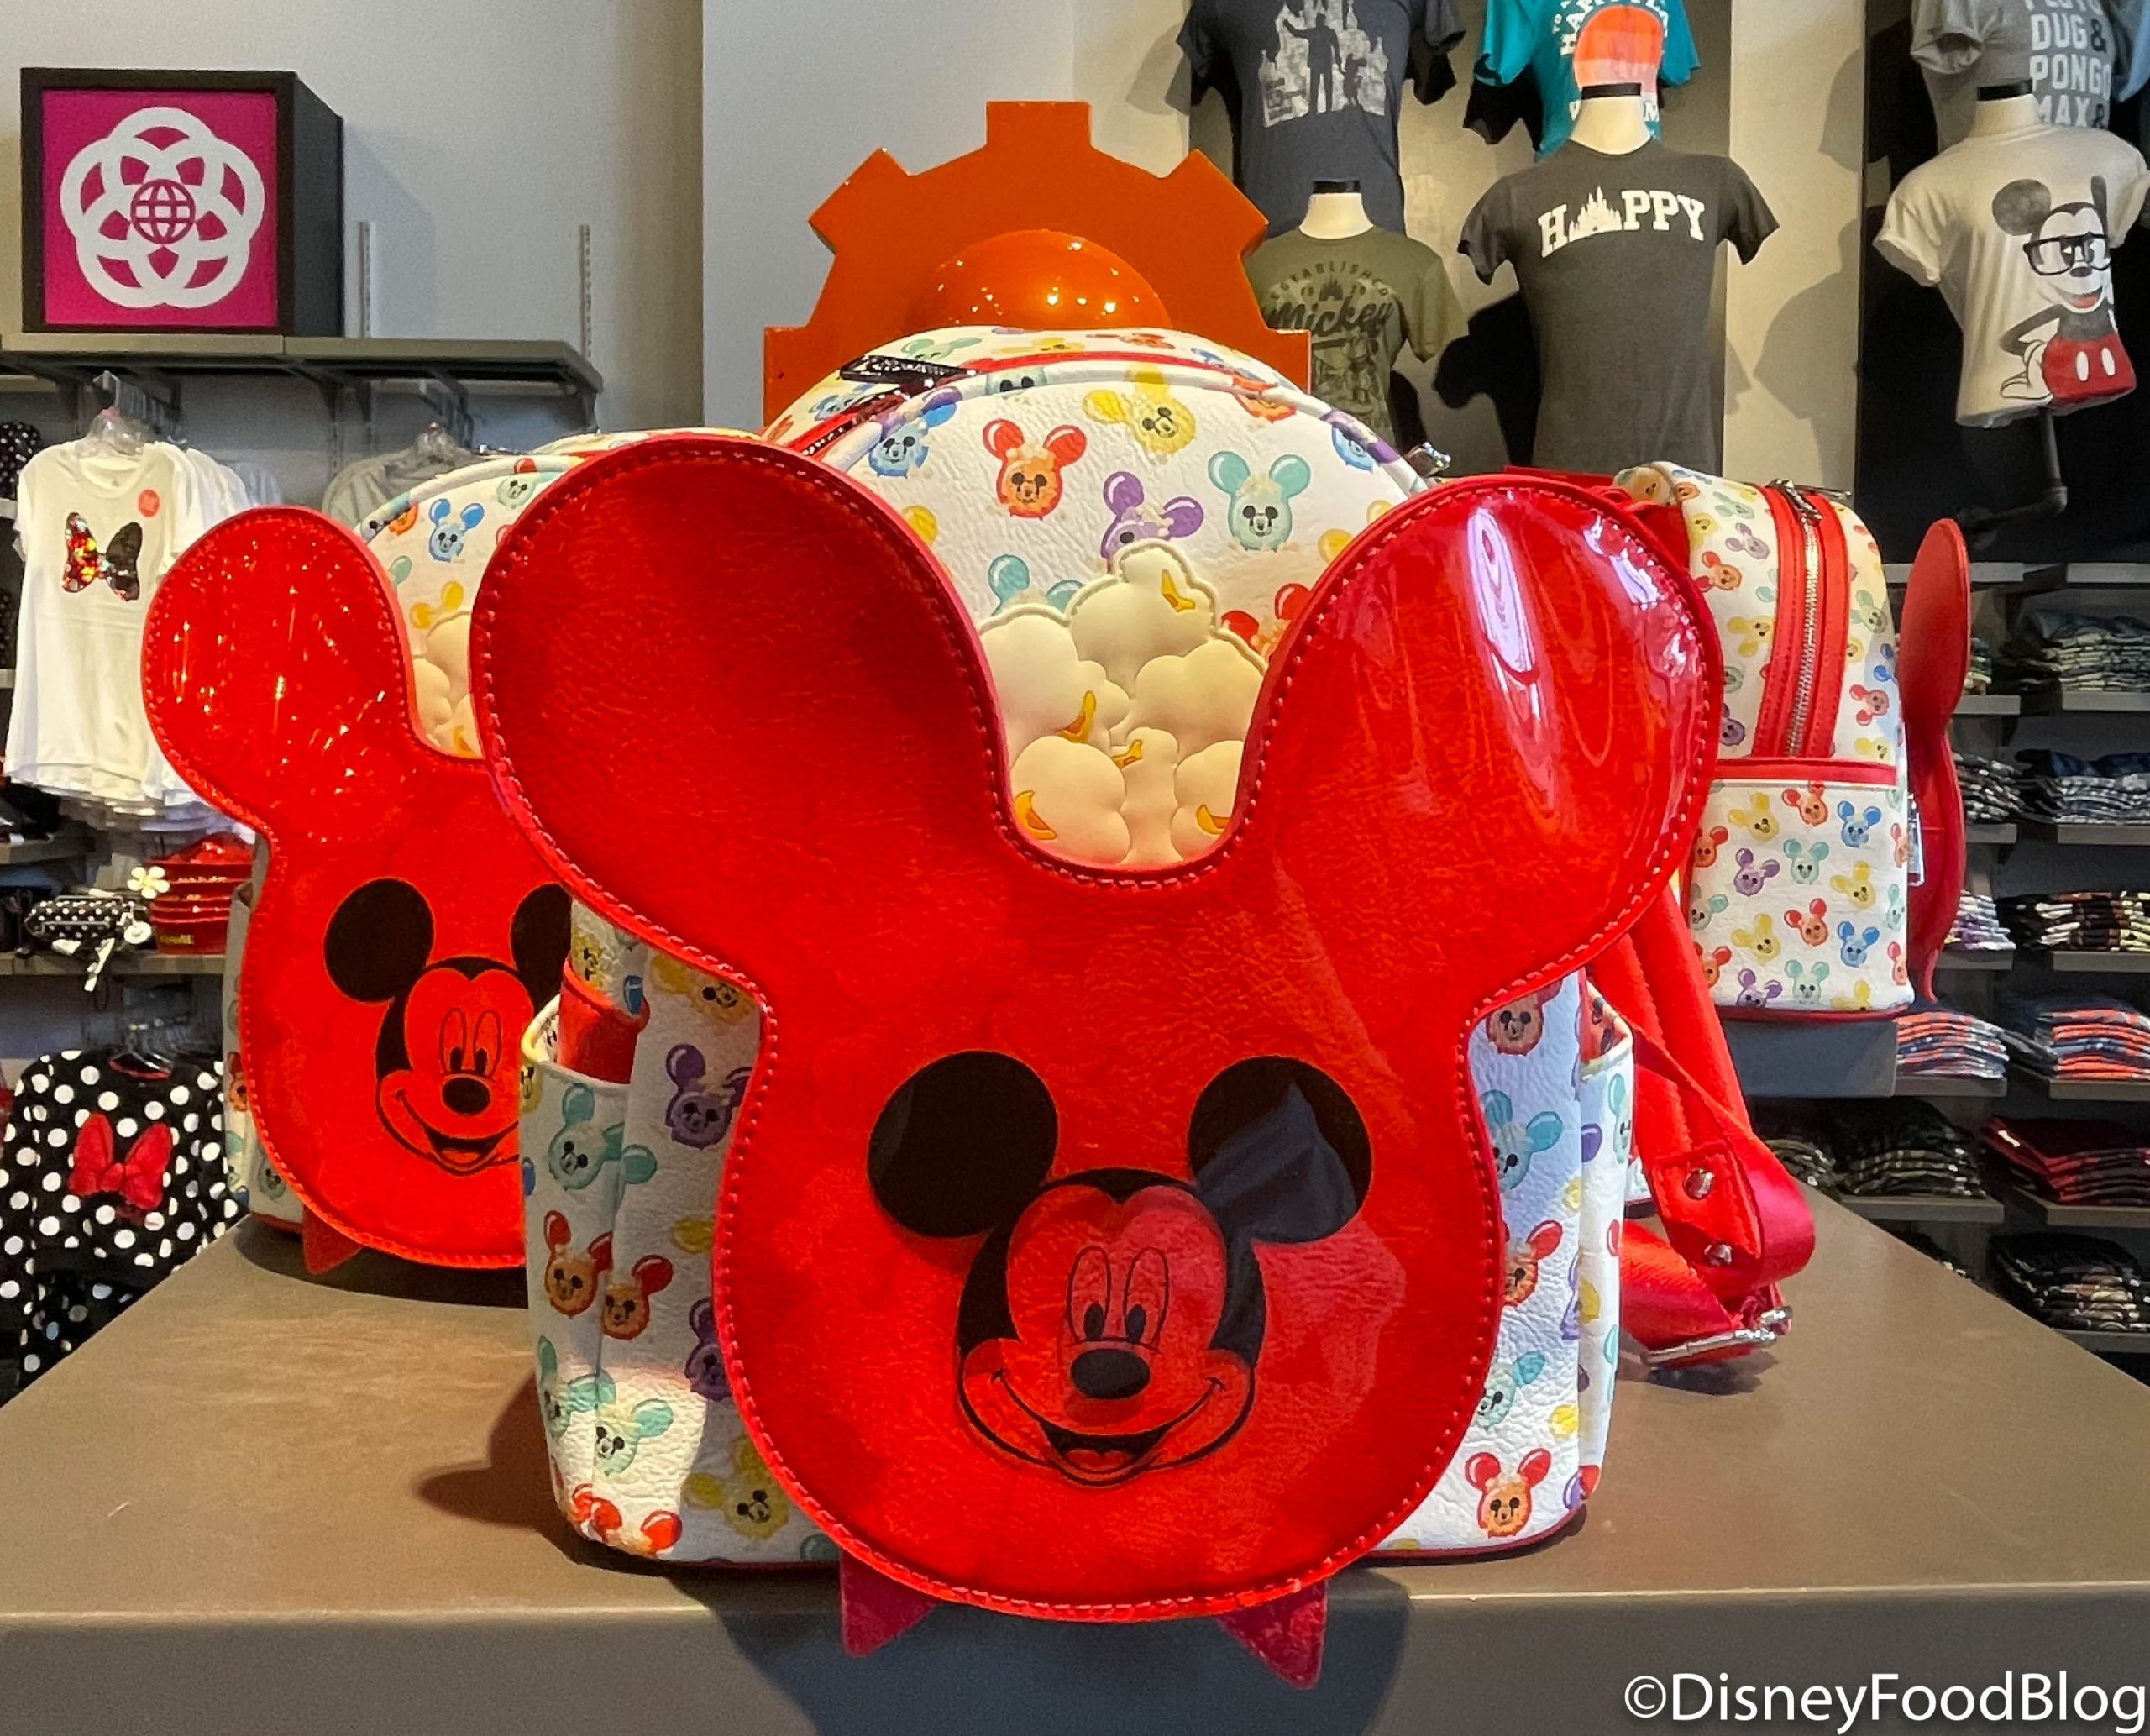 Is the Popcorn-Scented Spirit Jersey in Disney World Taking Things 